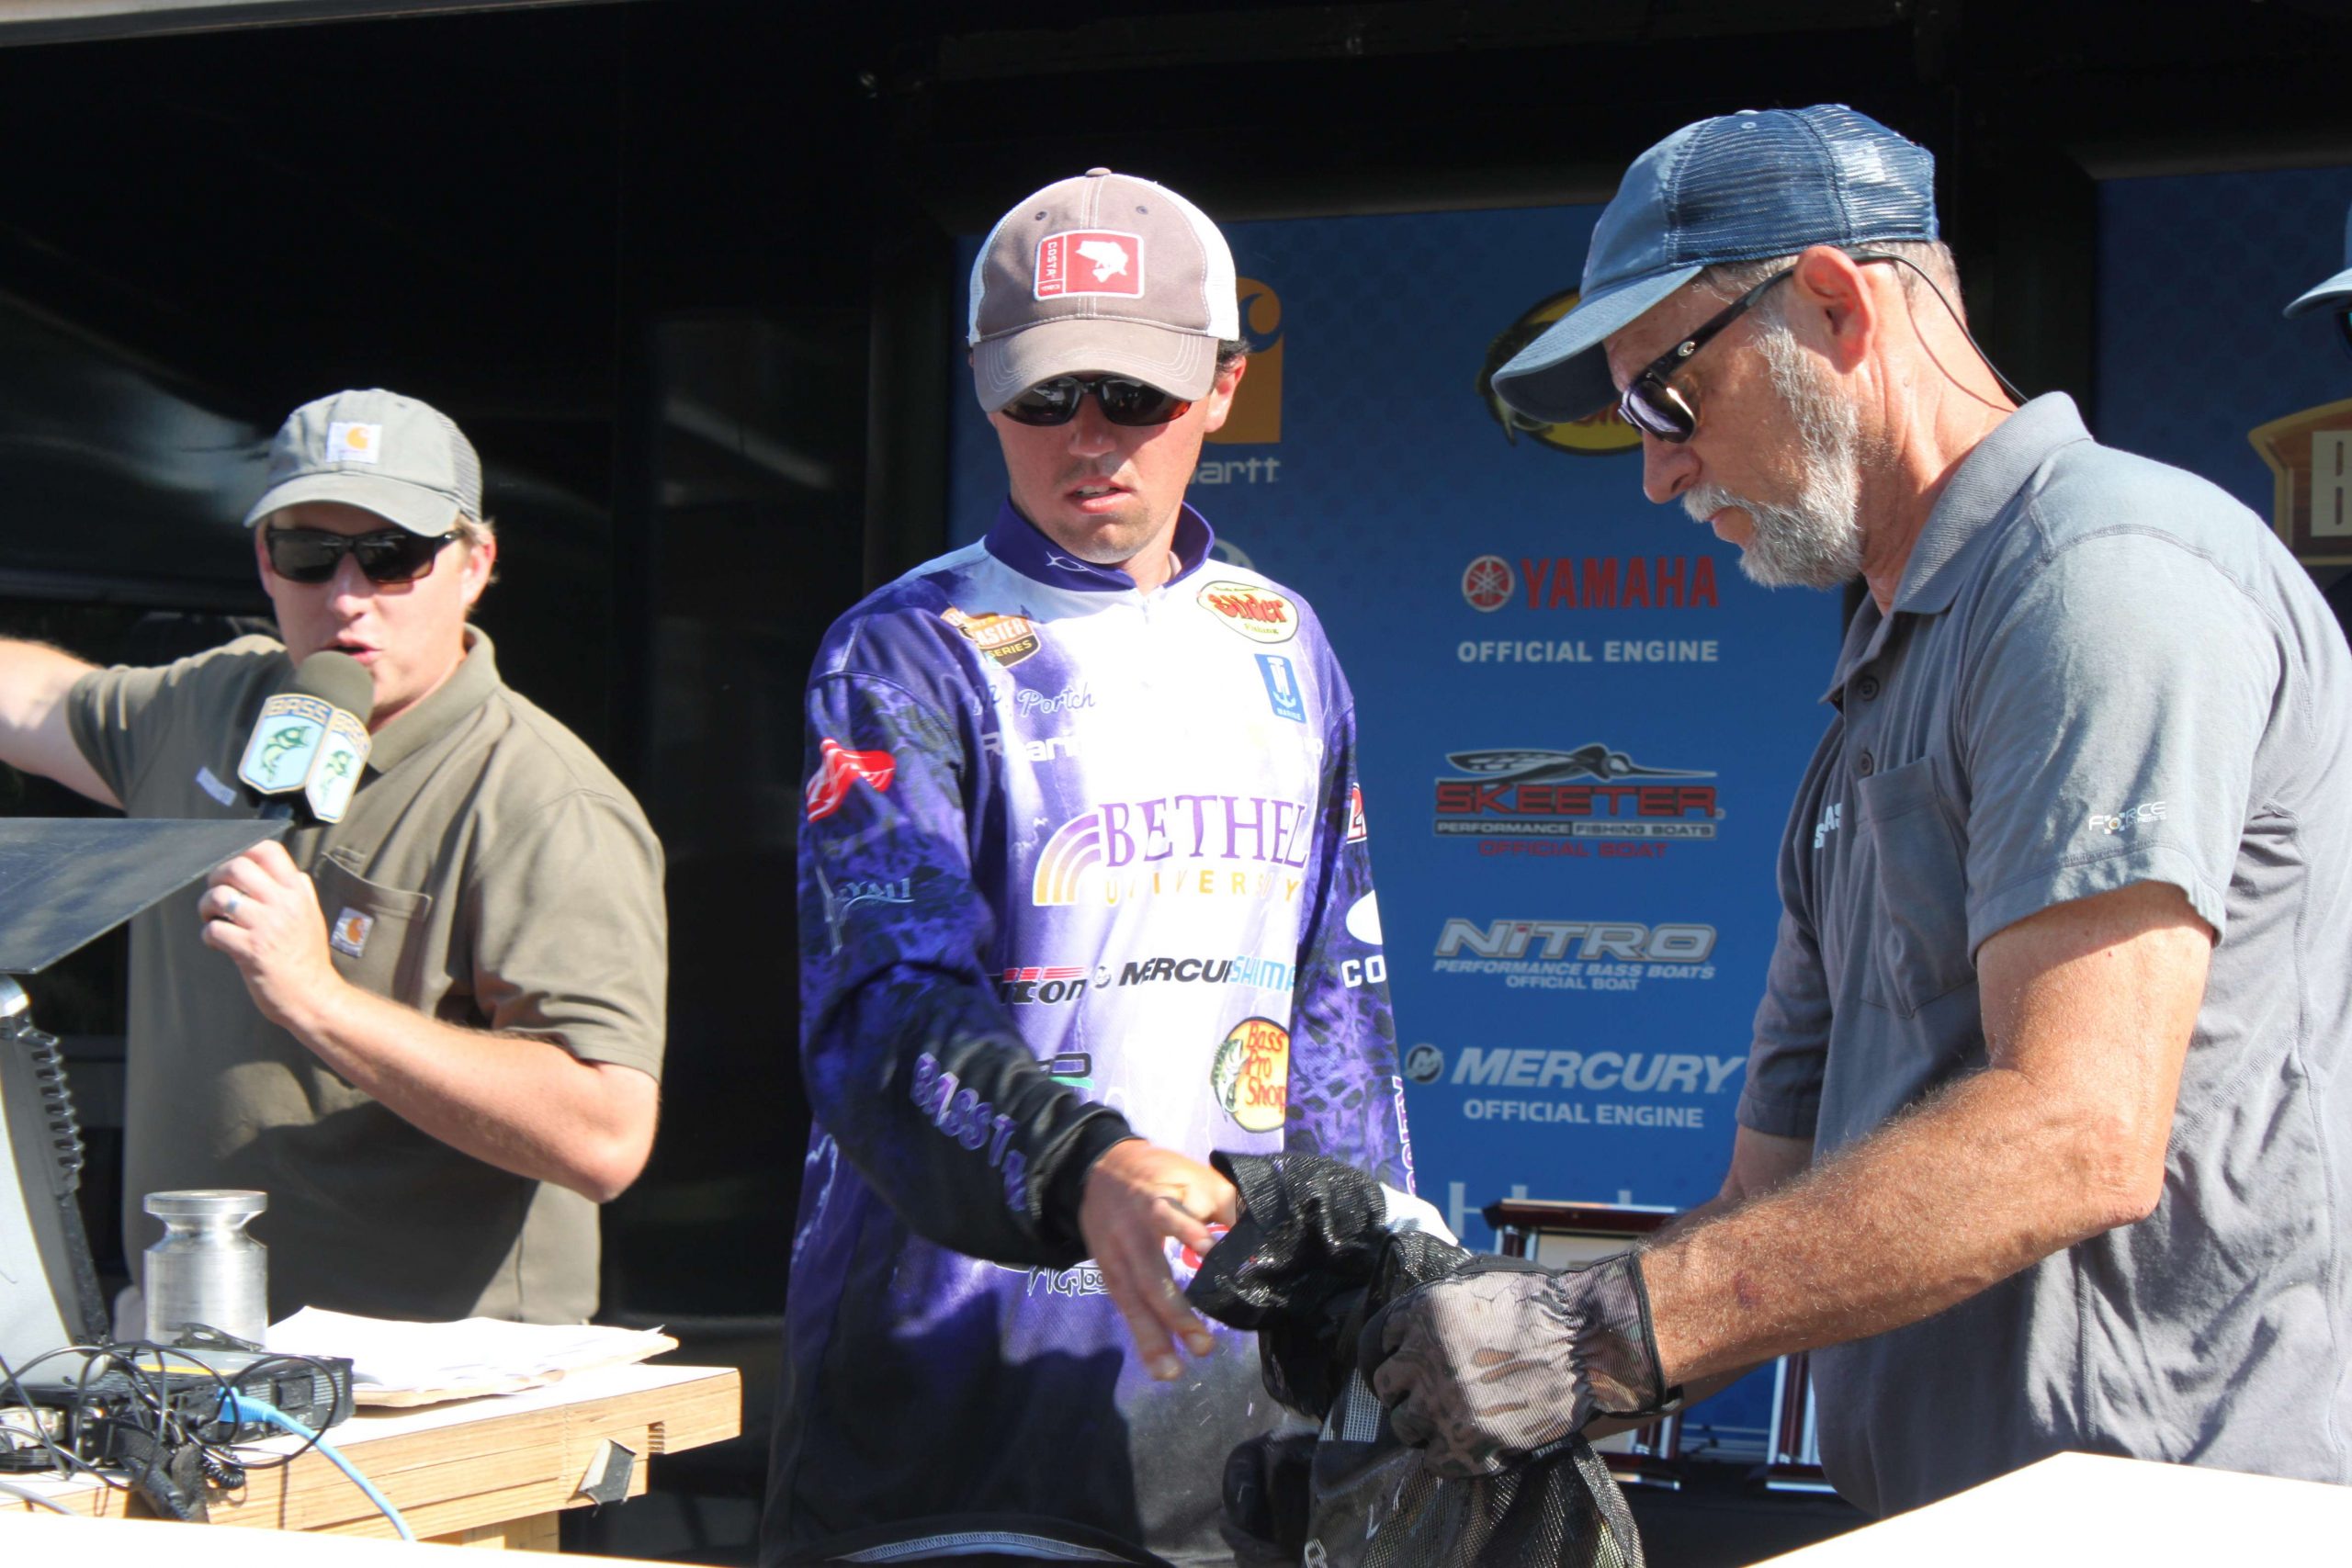 And thatâs the tandem of Cully Scroggins and Nathon Portch. The Bethel University anglers led after Day 1 and Day 2 and were confident they could land another quality bag on Saturday.